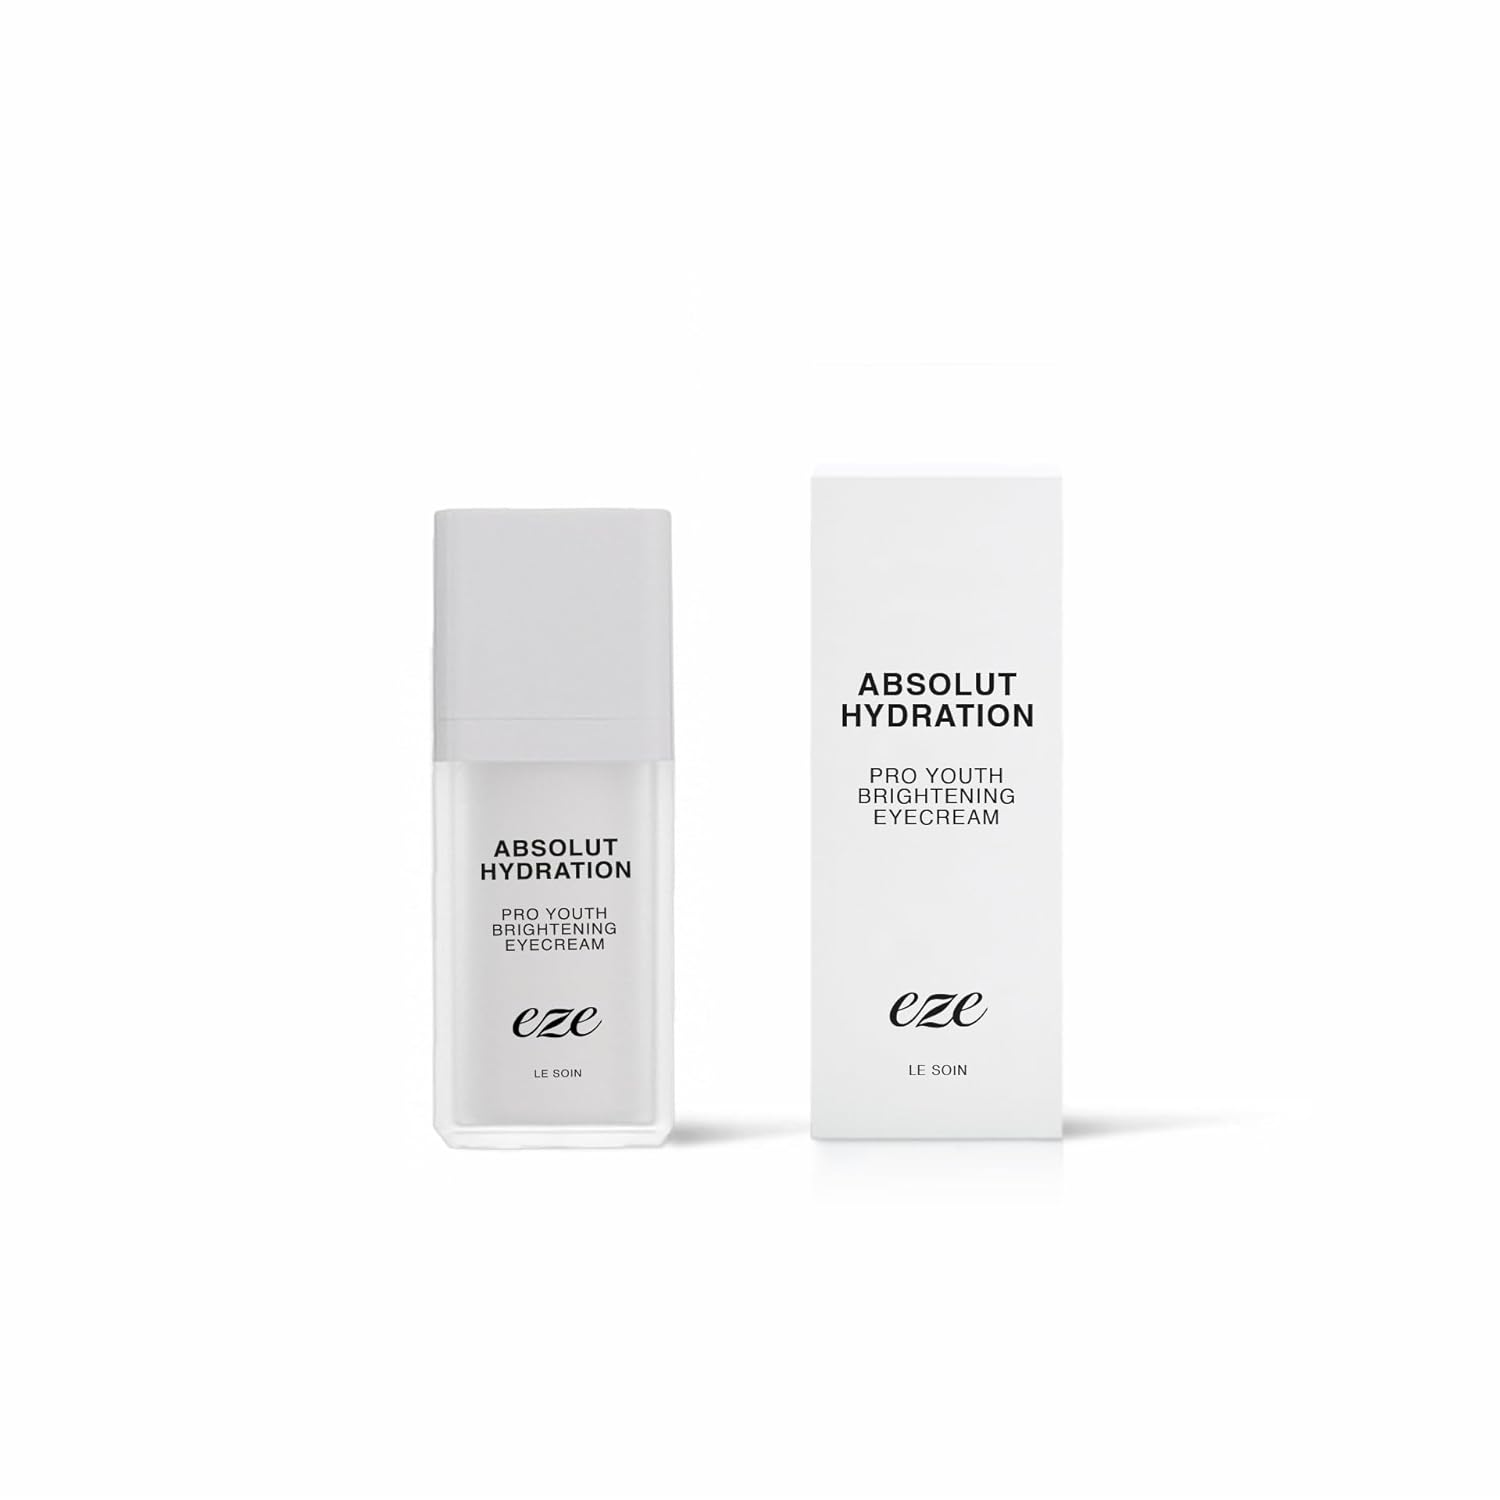 Eze essentials-absolutely hydration pro Youth Brightening Eyecream, push-up effect, radiant eye area, activation collagen synthesis, cruelty-free, vegan, 15 ml